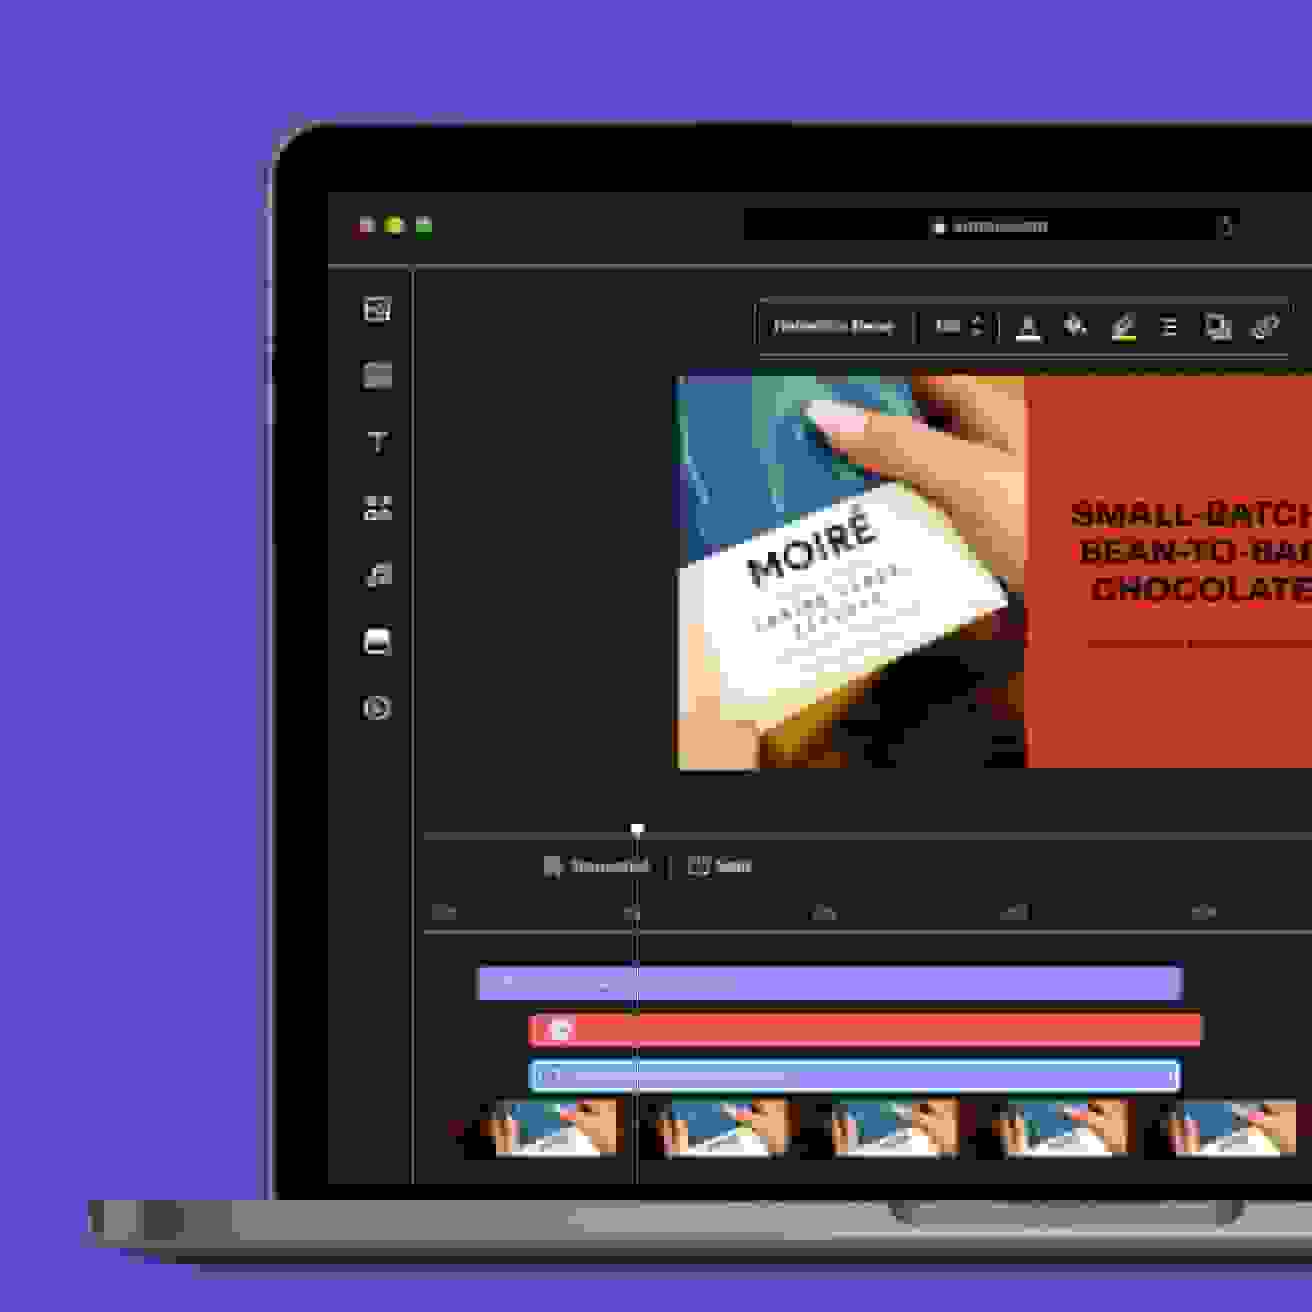 Vimeo online video editor screenshot that shows text-based video editing for a chocolate brand